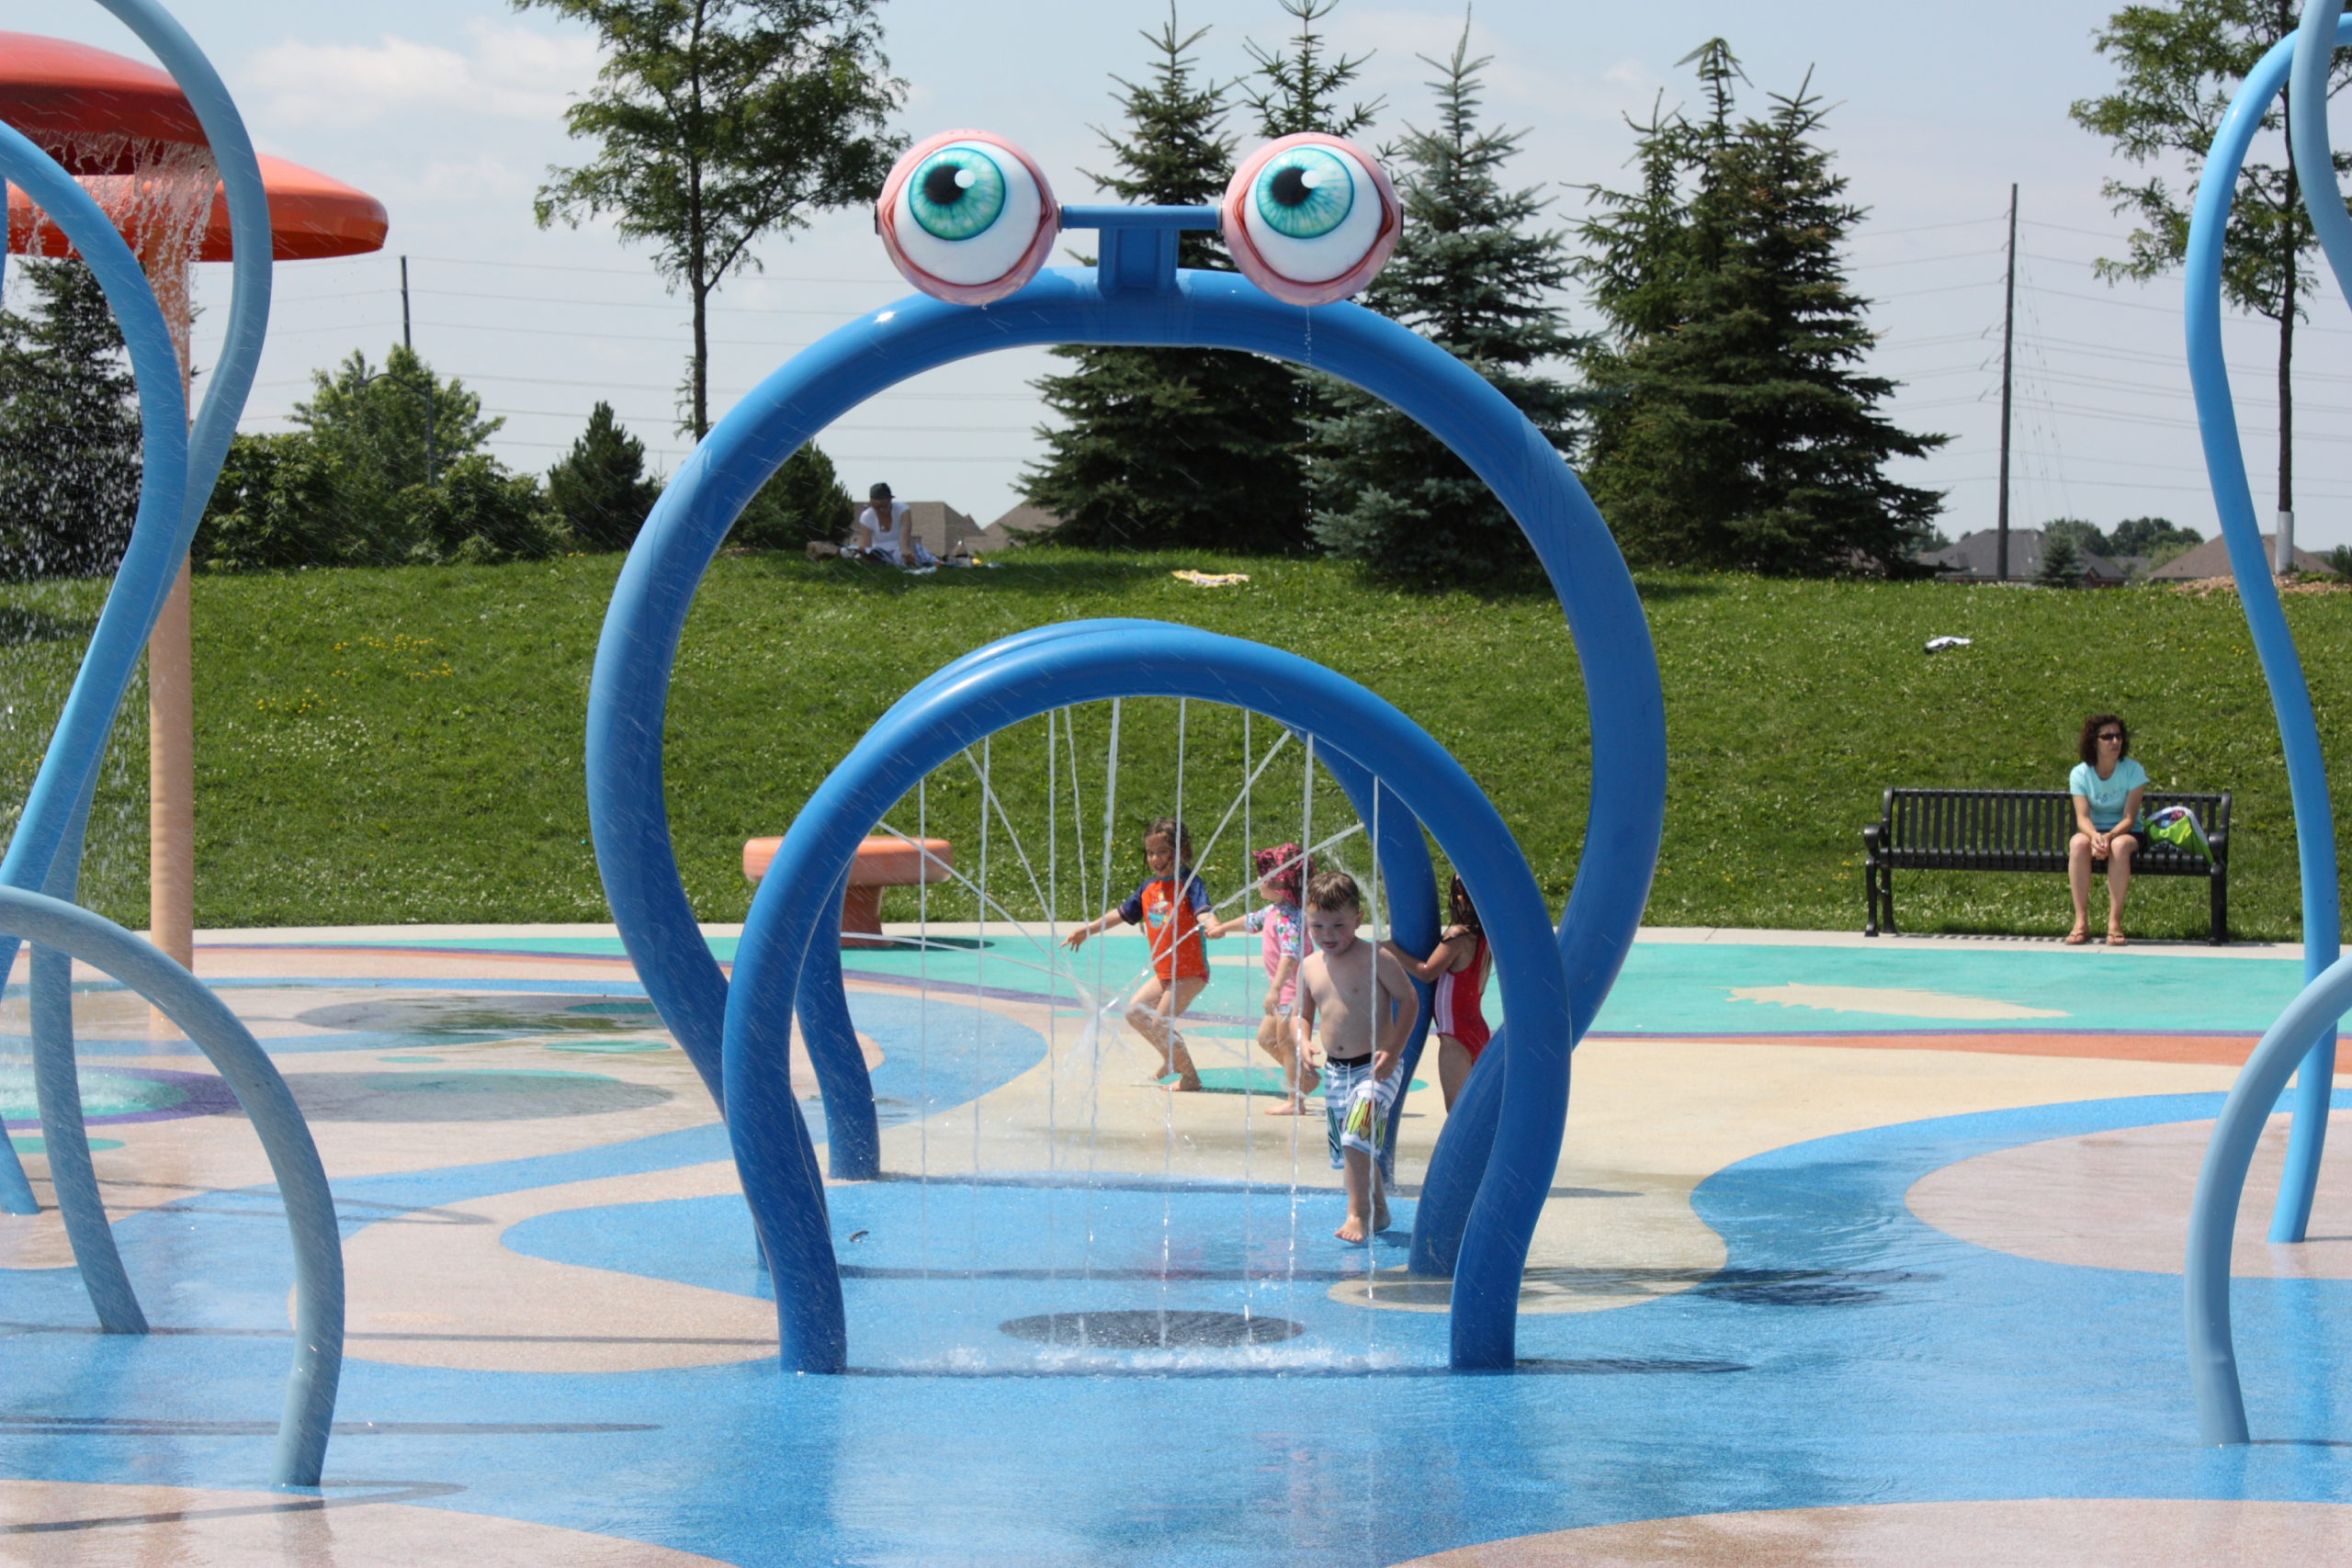 Children playing in the water park.